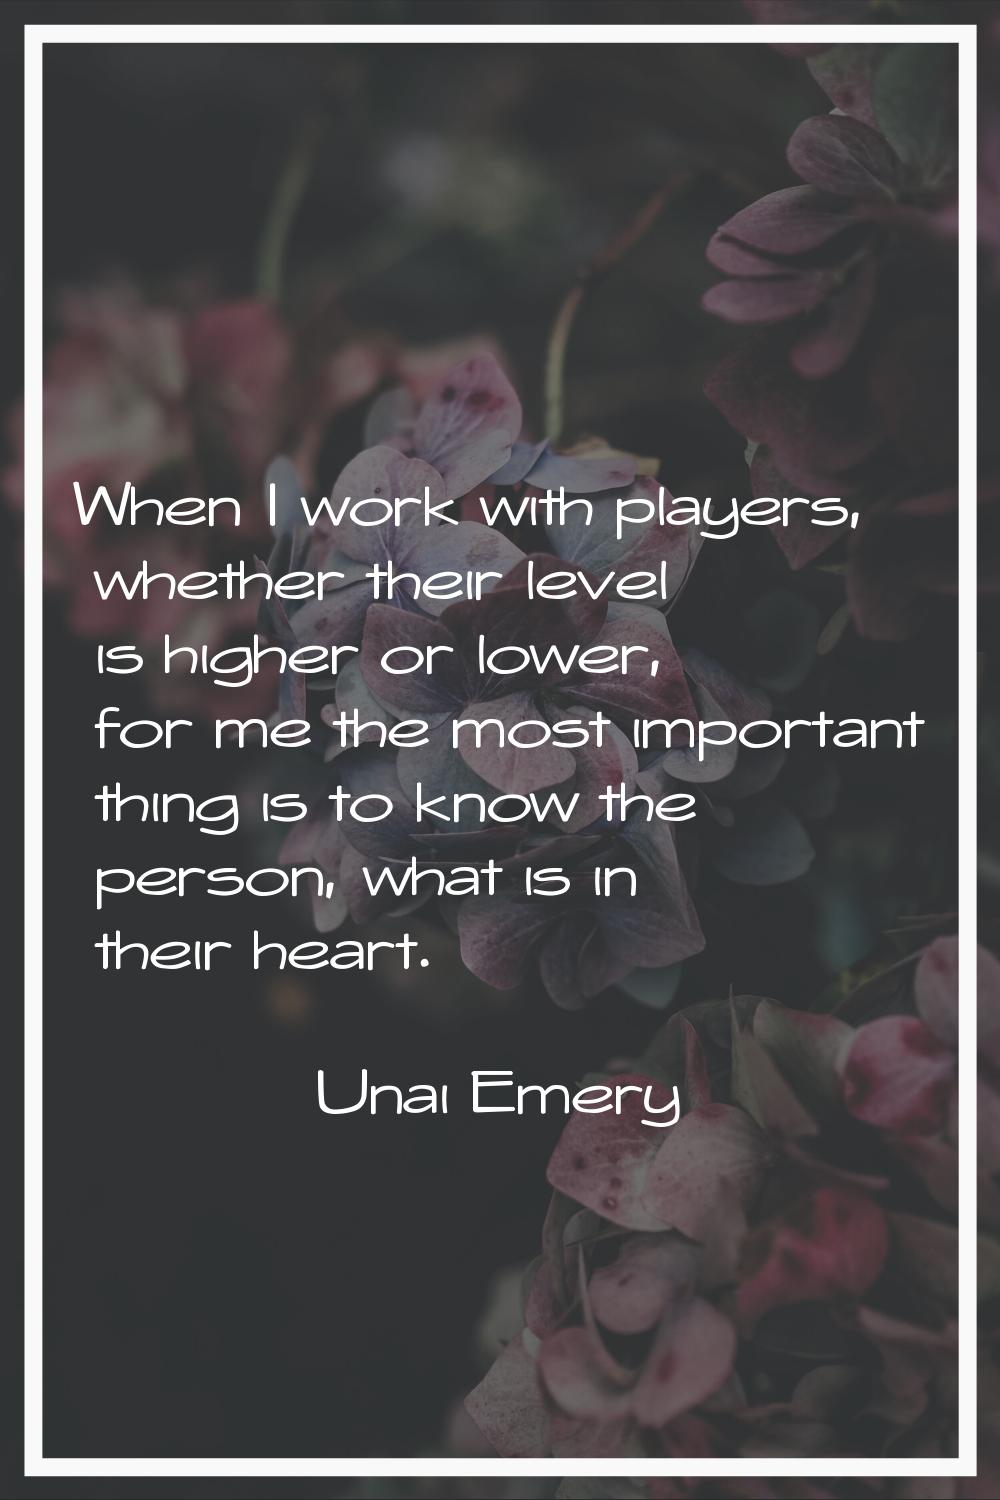 When I work with players, whether their level is higher or lower, for me the most important thing i